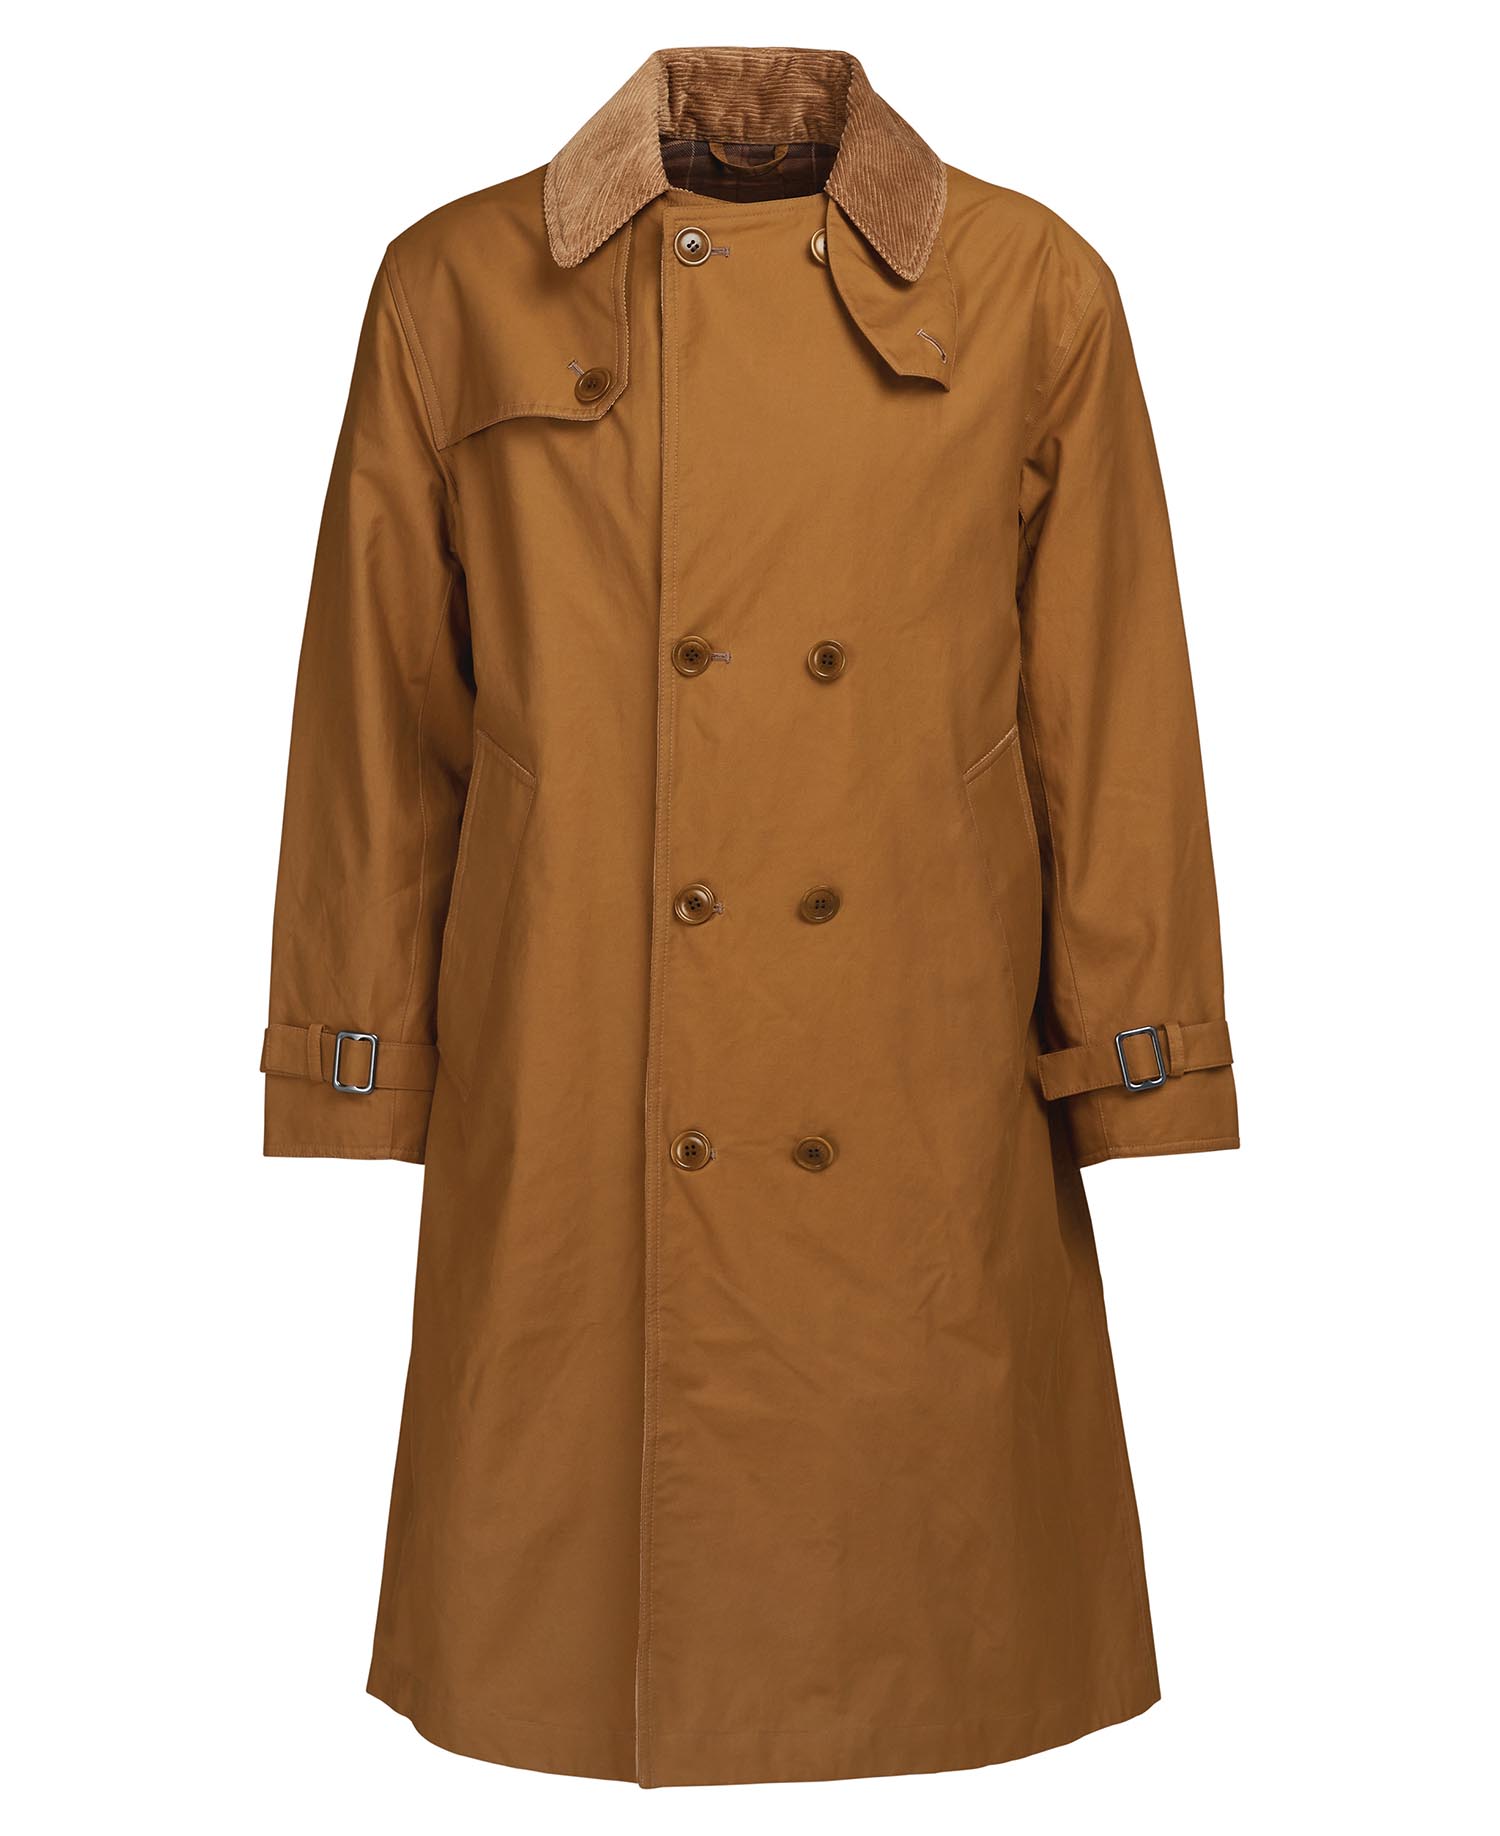 Shop the Barbour Whitley Casual Trench Coat in Brown today. | Barbour